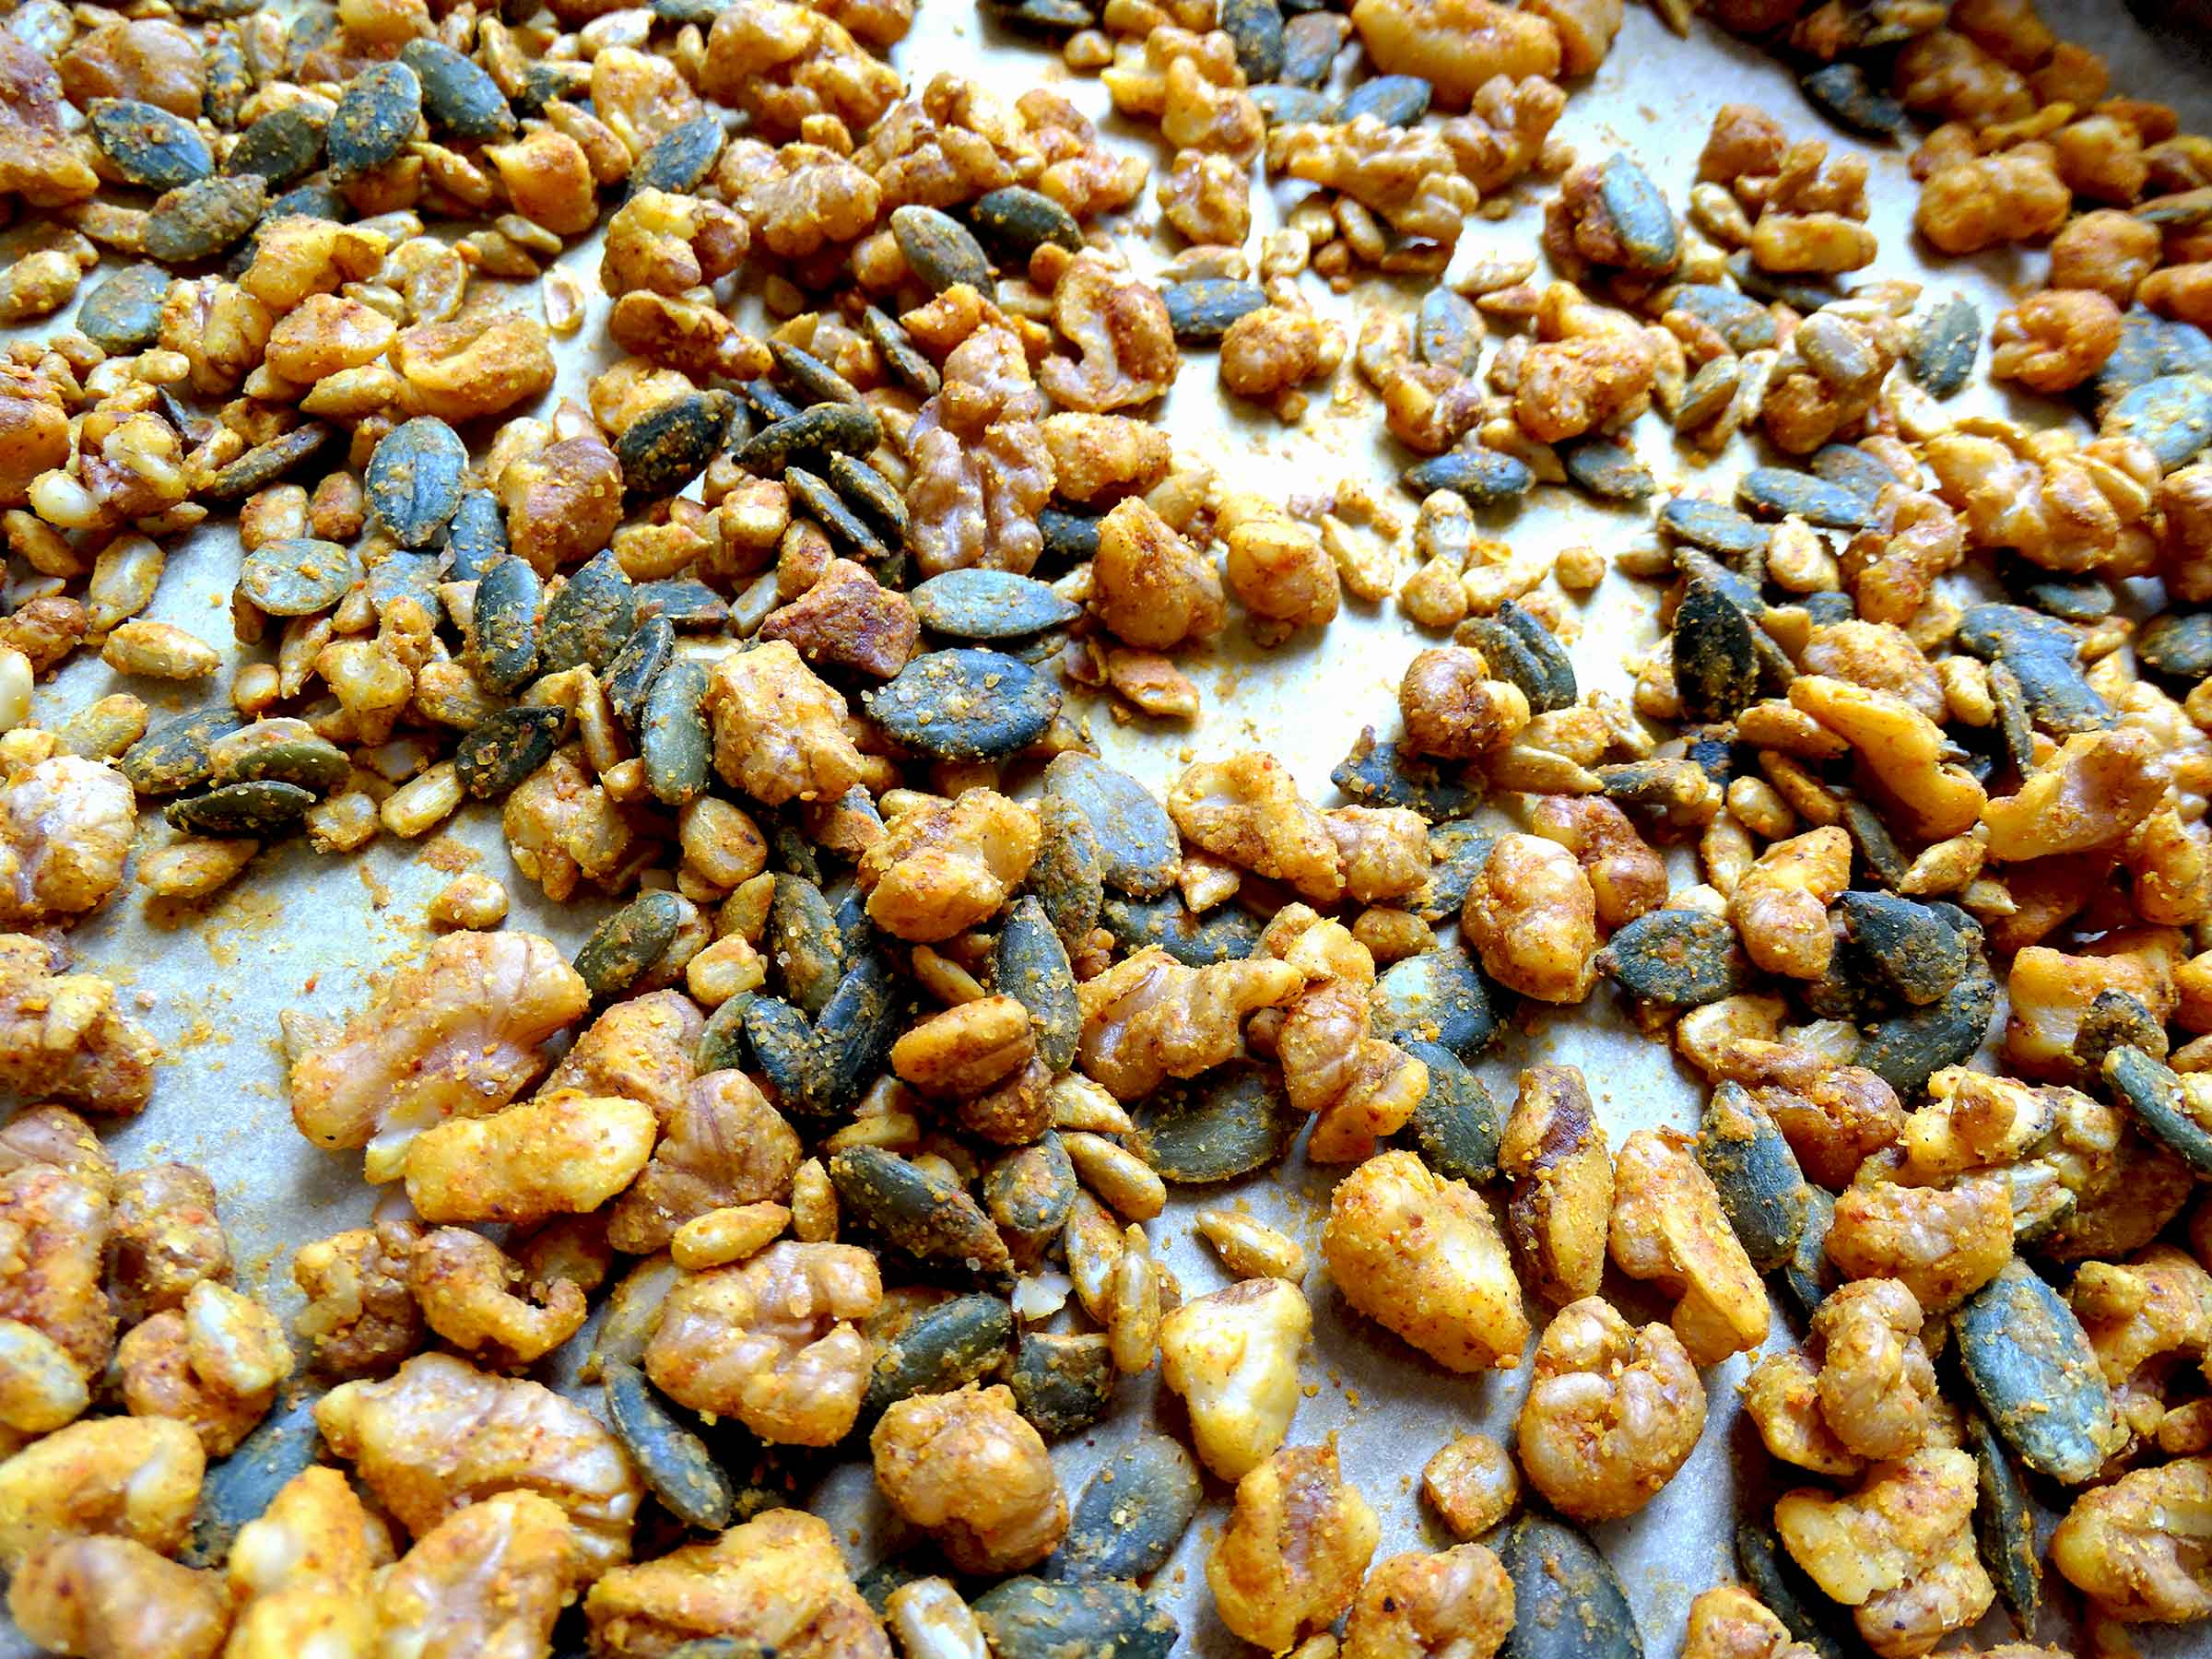 Spicy Nut and Seed Mix